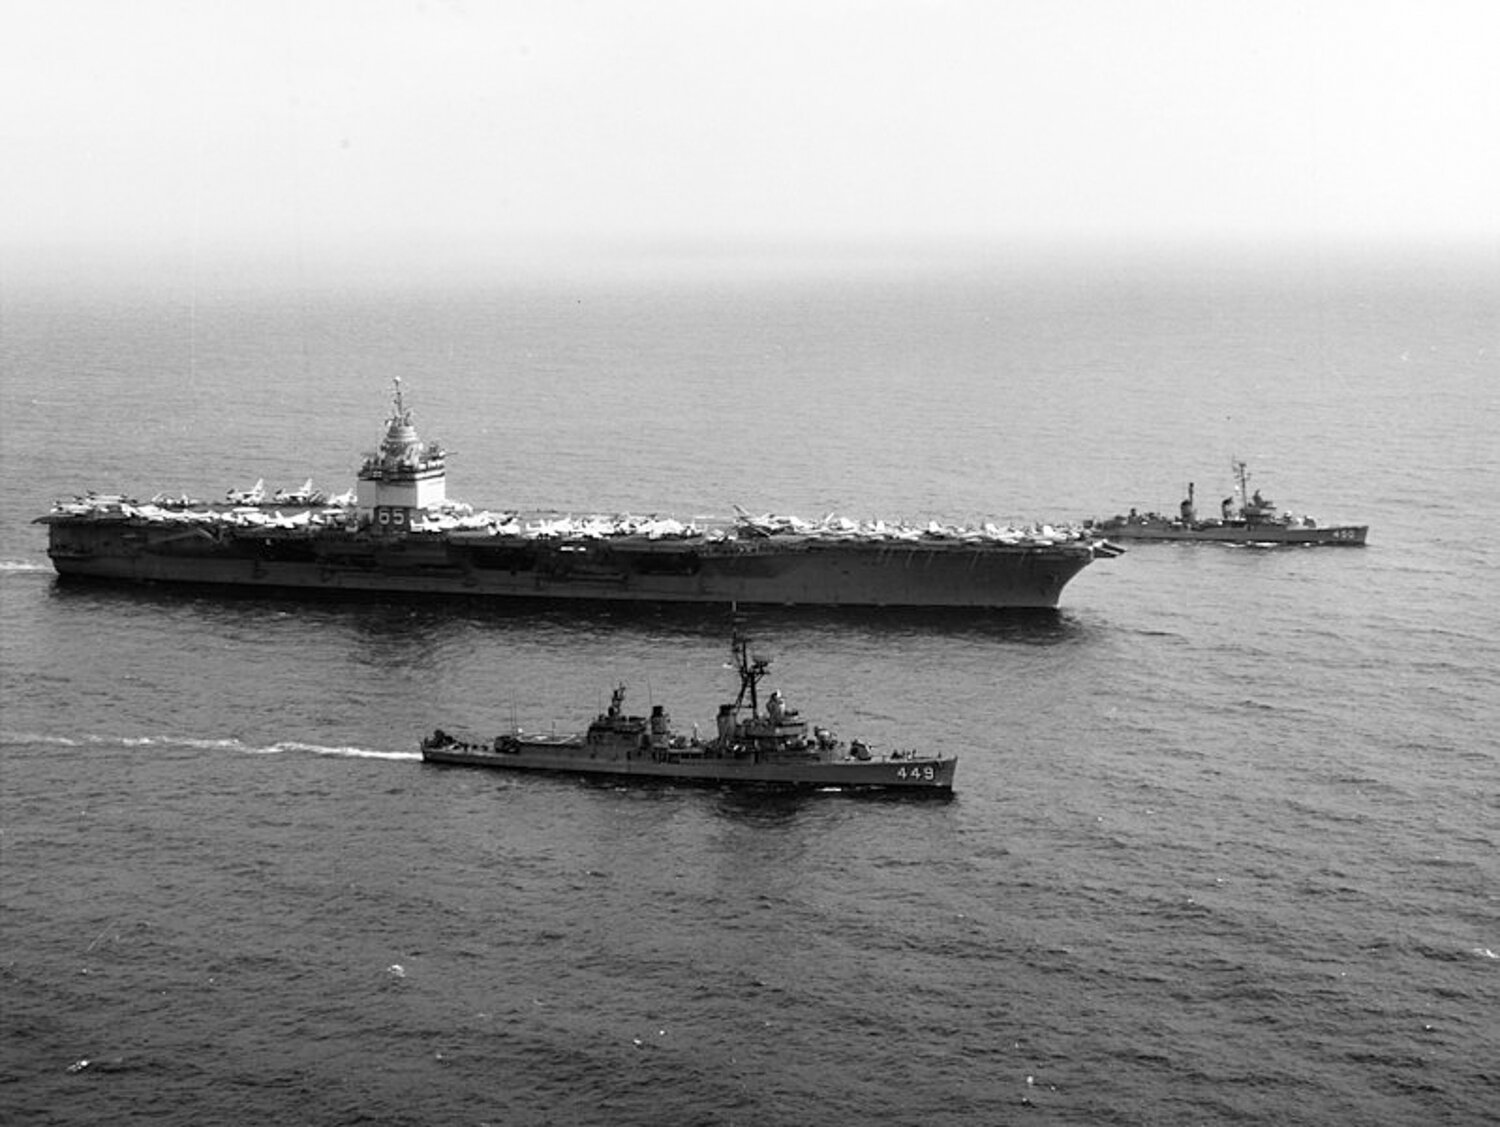 The destroyers U.S.S. Nicholas, foreground, and U.S.S. O'Bannon escort the U.S.S. Enterprise in the Gulf of Tonkin on March 6, 1968. Photo courtesy the National Archives.